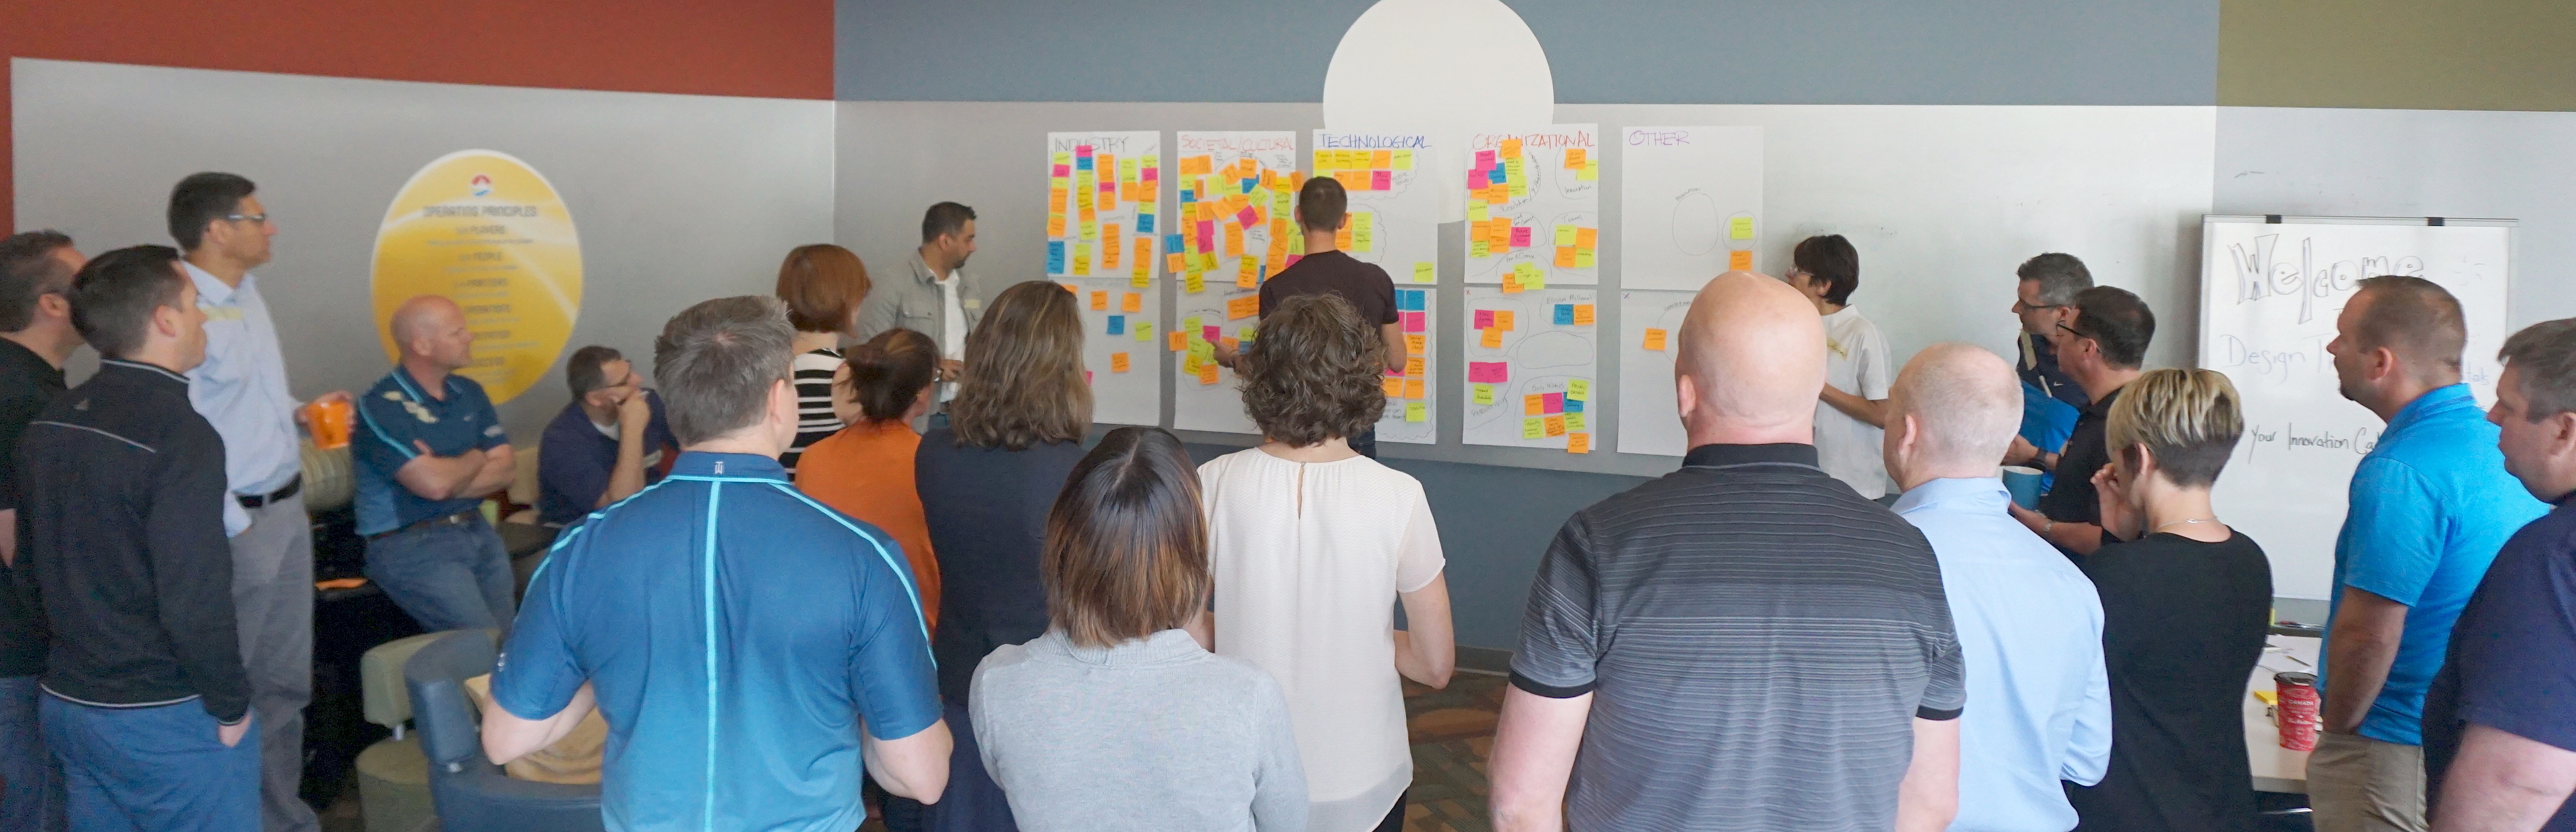 5 Tips for Rocking the Boat with Design Thinking – Part 2 of 2